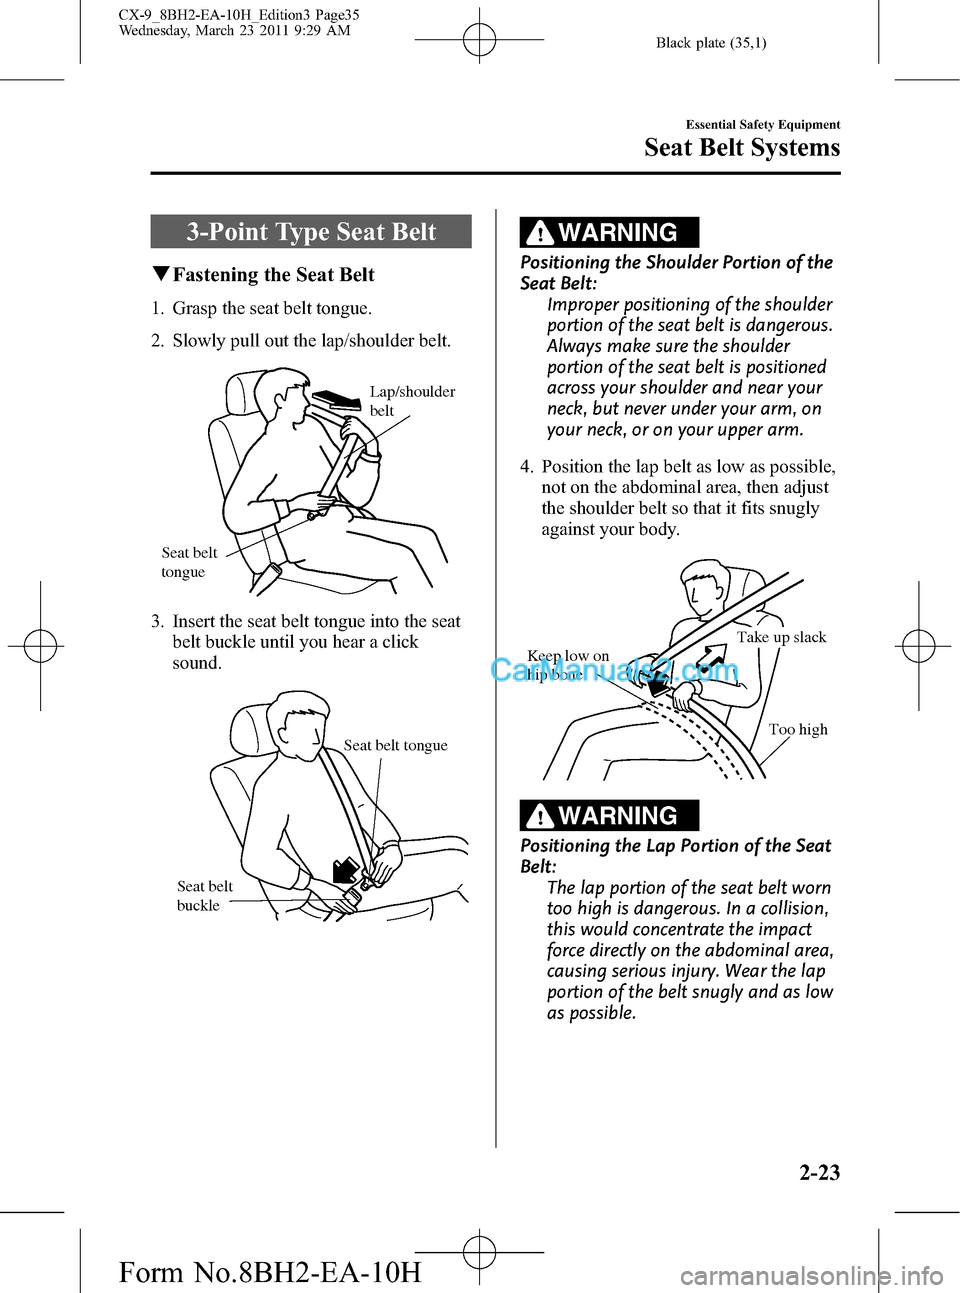 MAZDA MODEL CX-9 2011   (in English) Owners Guide Black plate (35,1)
3-Point Type Seat Belt
qFastening the Seat Belt
1. Grasp the seat belt tongue.
2. Slowly pull out the lap/shoulder belt.
Lap/shoulder 
belt
Seat belt 
tongue
3. Insert the seat belt